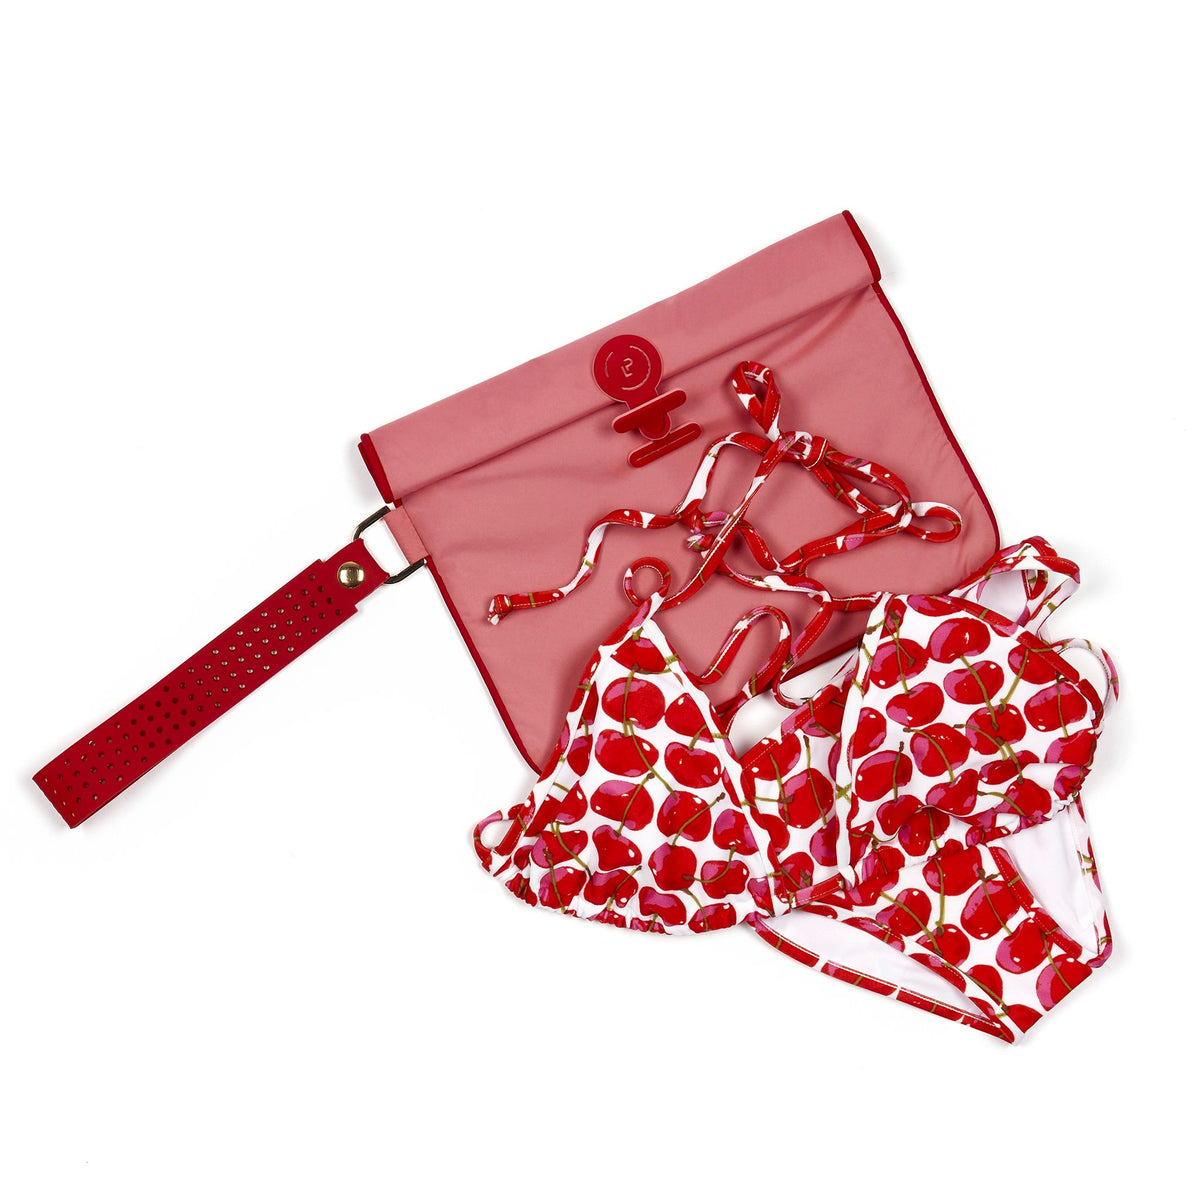 Small Wet Bag in Peony and Chilli colourway shown flat with a bikini placed on top